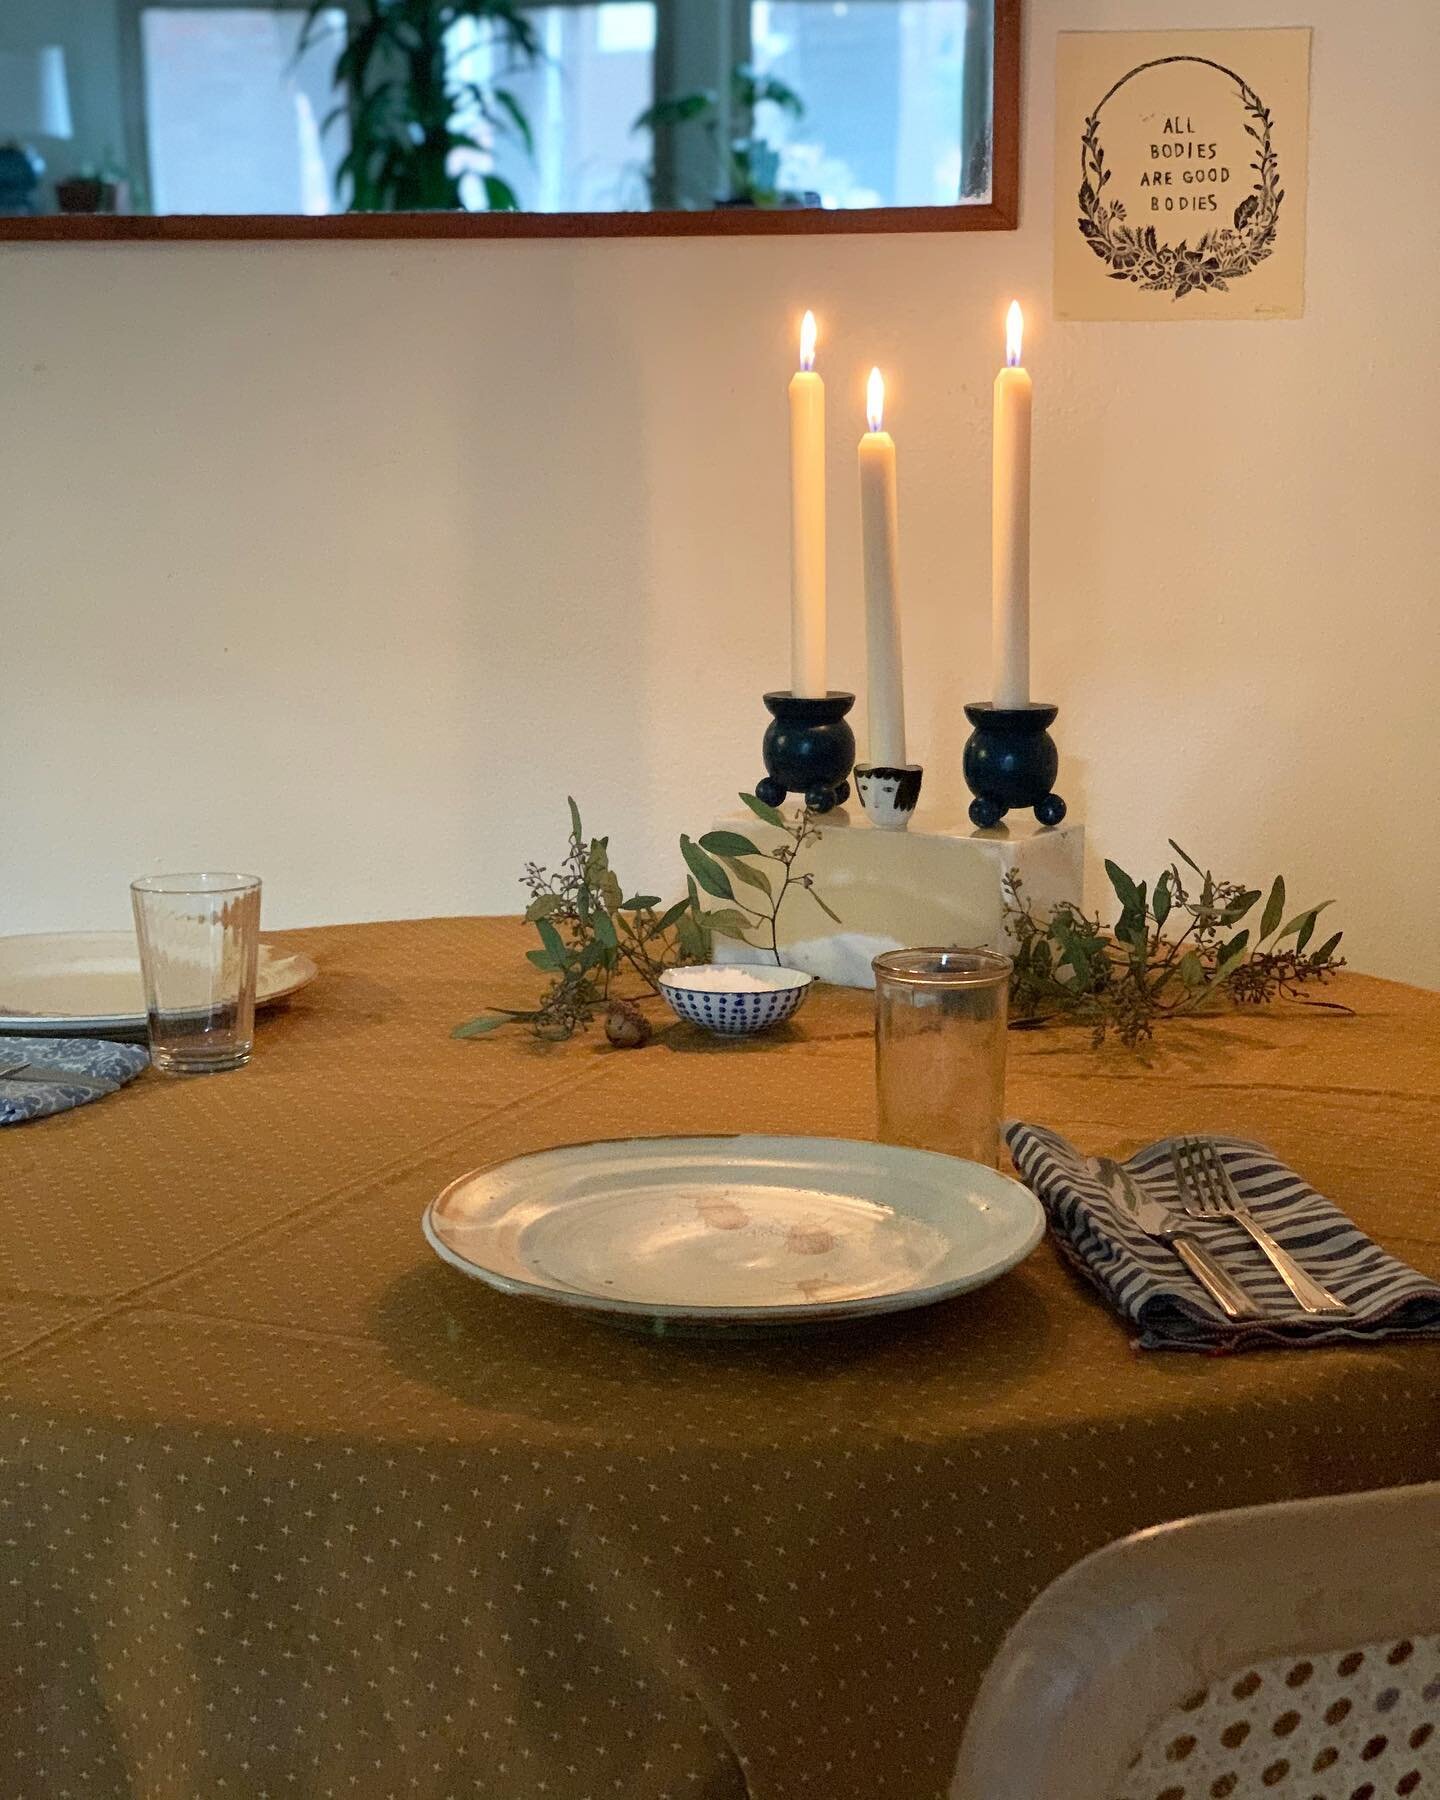 Our little table for two. I had fun foraging items from around the apartment to create a tablescape for our dinner.
My partner and I stayed home this year and went hard on food from @brothers.and.co @salmonberrygoods @sseebode plus a few homemade dis